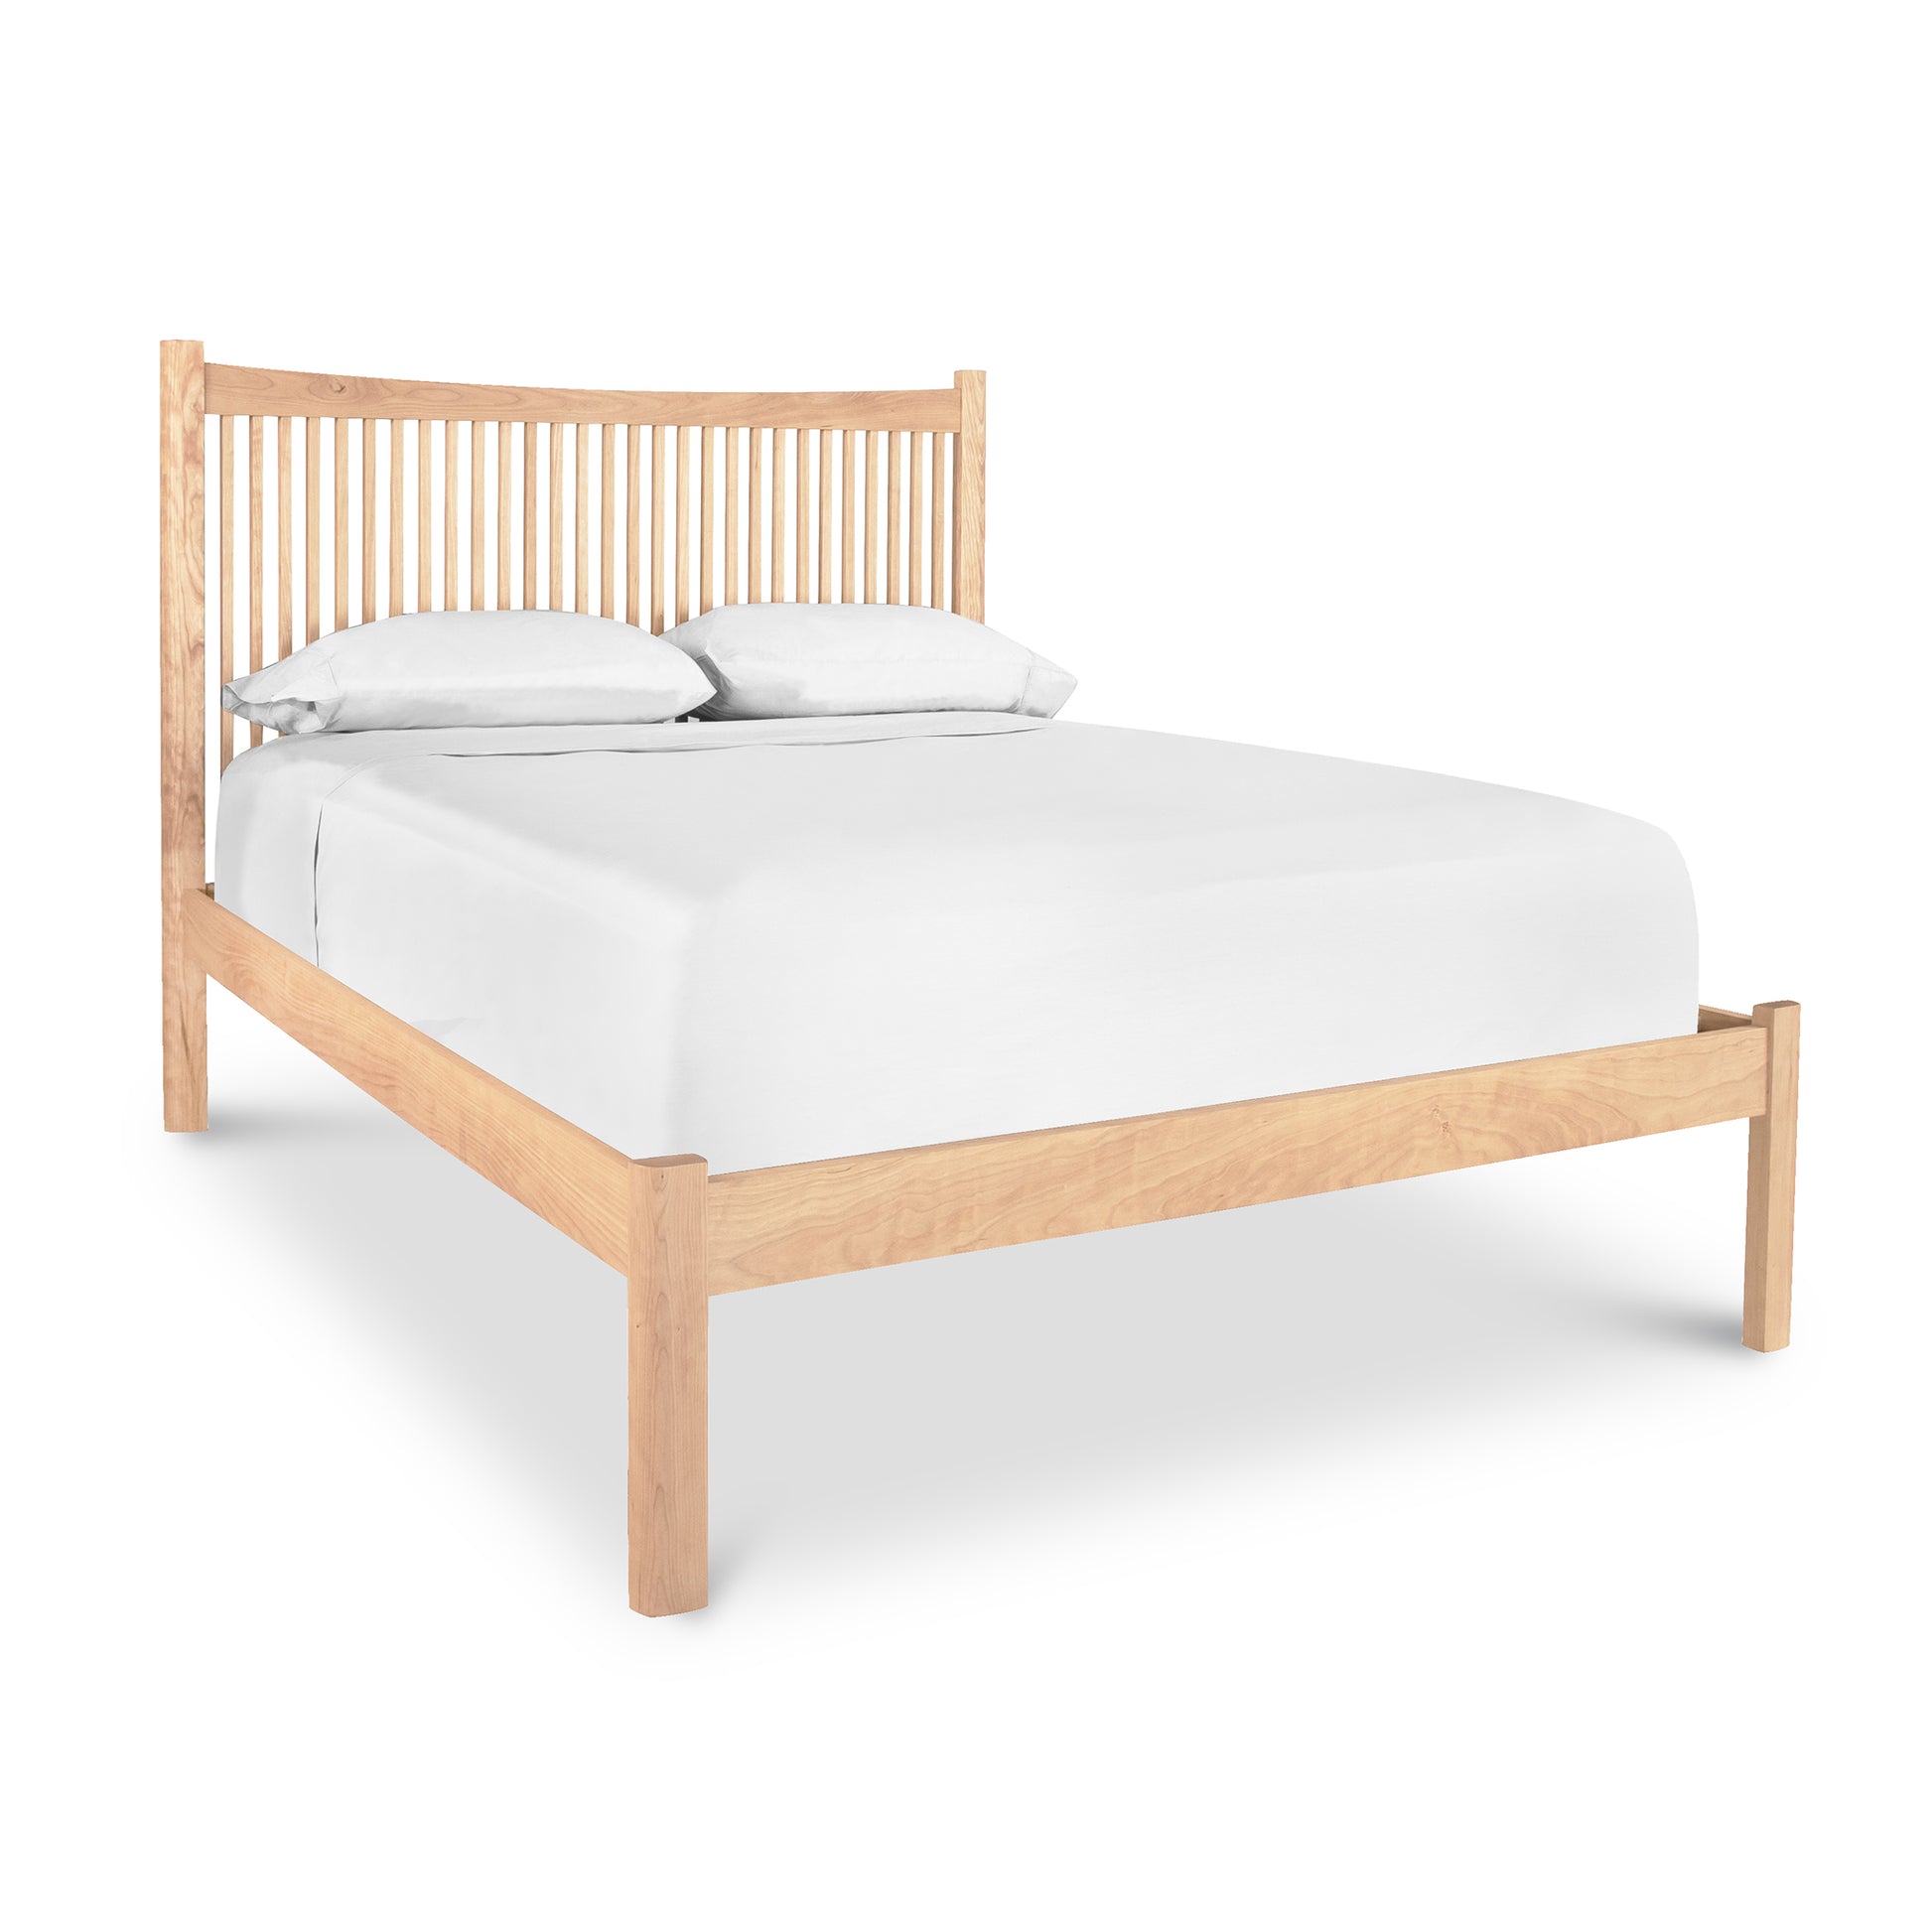 A Heartwood Shaker Low Footboard Bed frame featuring a headboard with vertical slats, supporting a white mattress with two pillows, isolated on a white background.Designed by Vermont Furniture Designs.